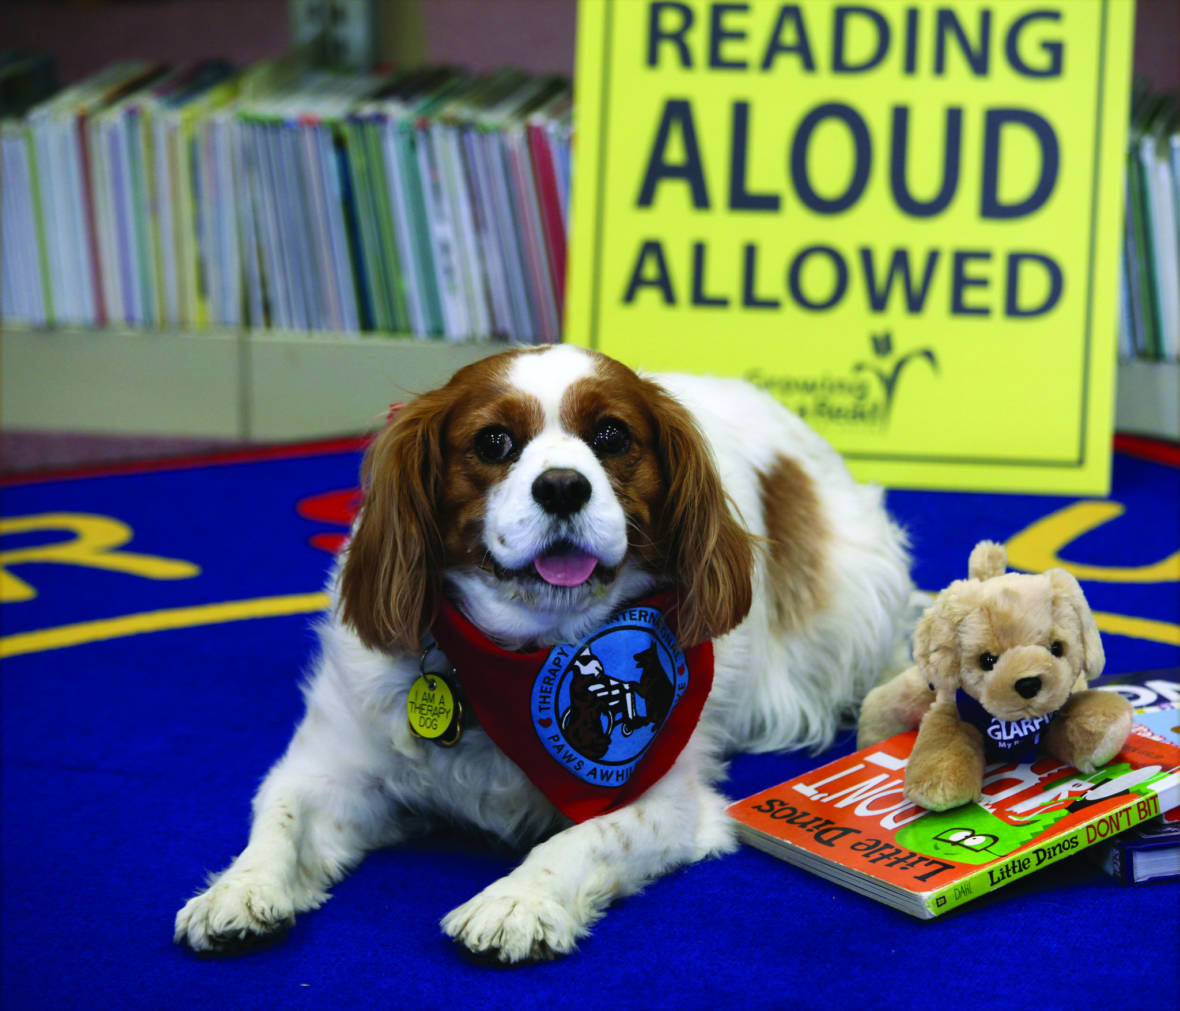 How Reading Aloud to Therapy Dogs Can Help Struggling Kids MindShift